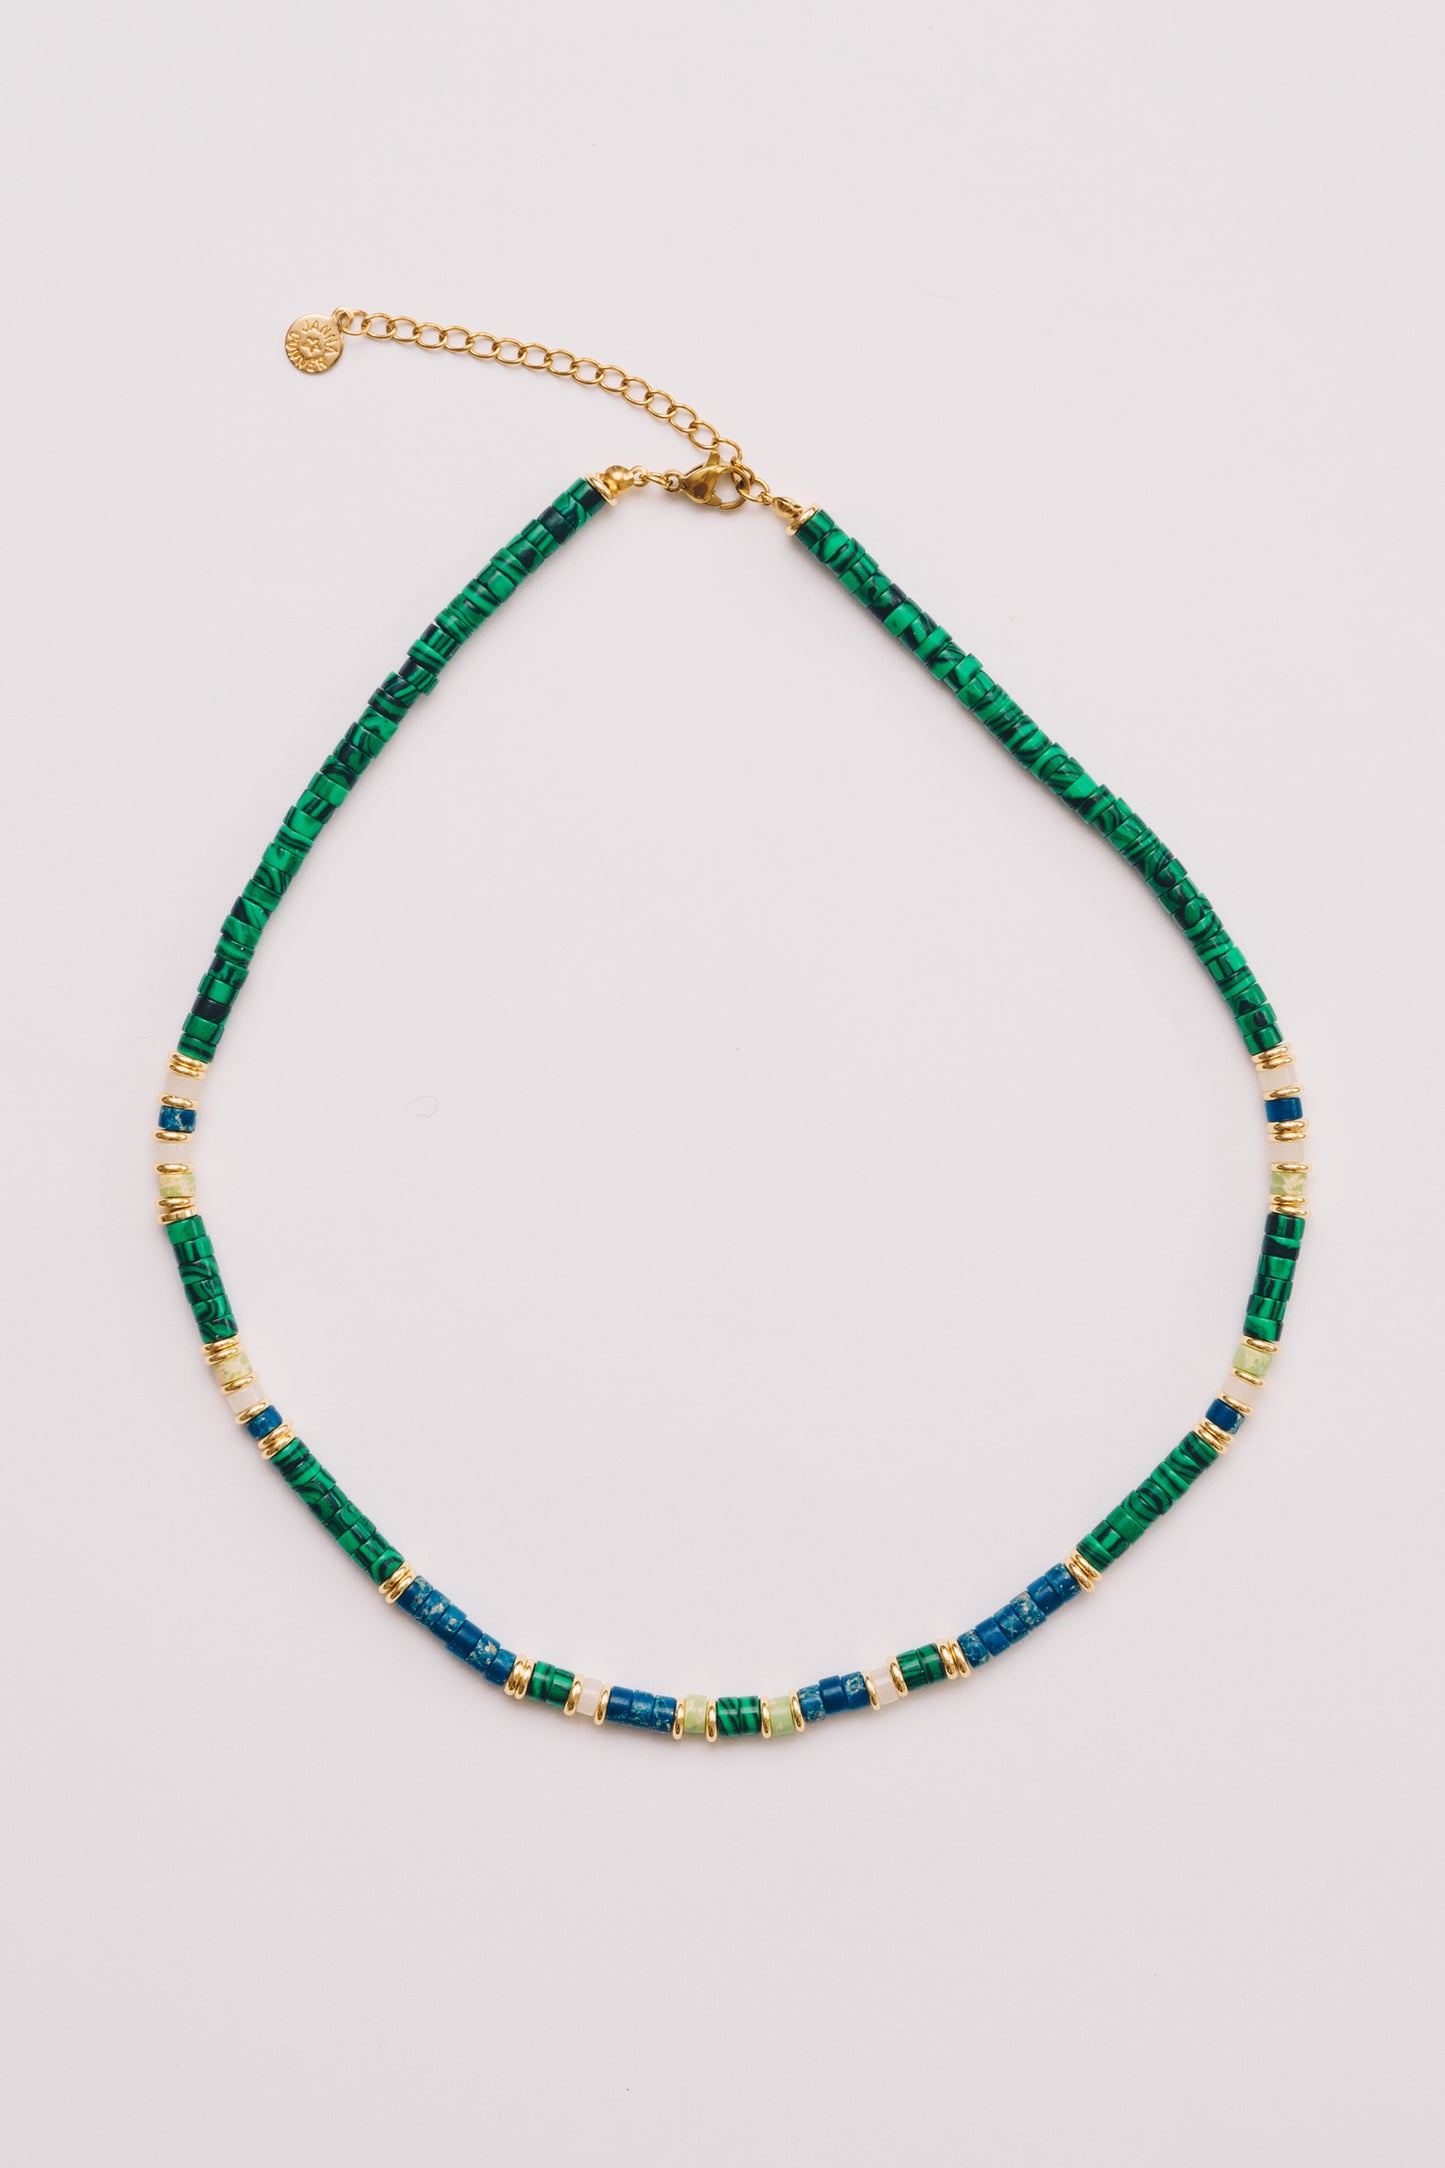 beaded green and blue rondelle necklace on white background